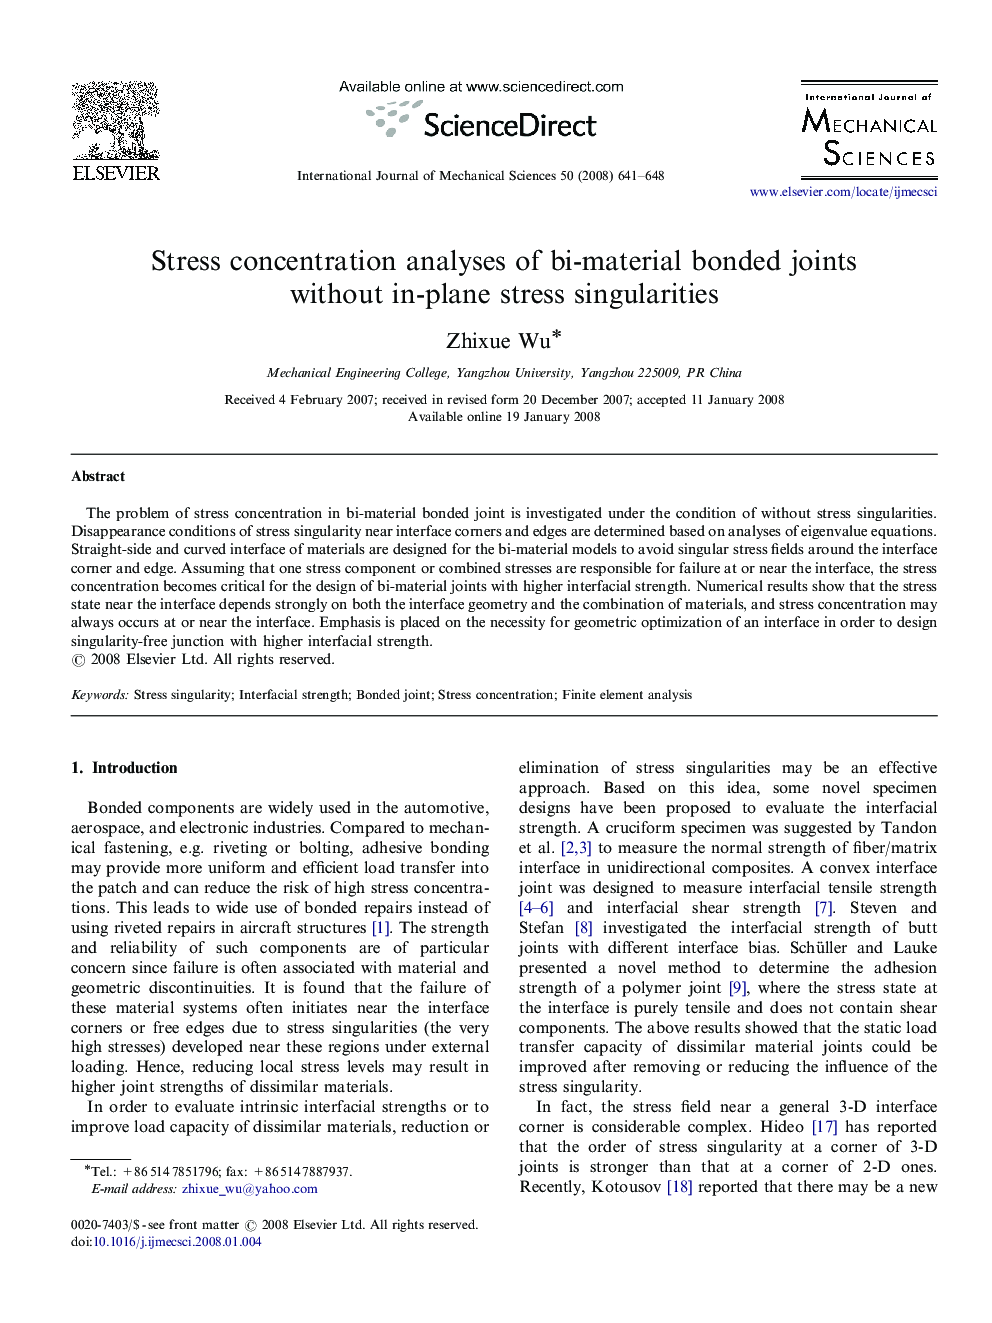 Stress concentration analyses of bi-material bonded joints without in-plane stress singularities